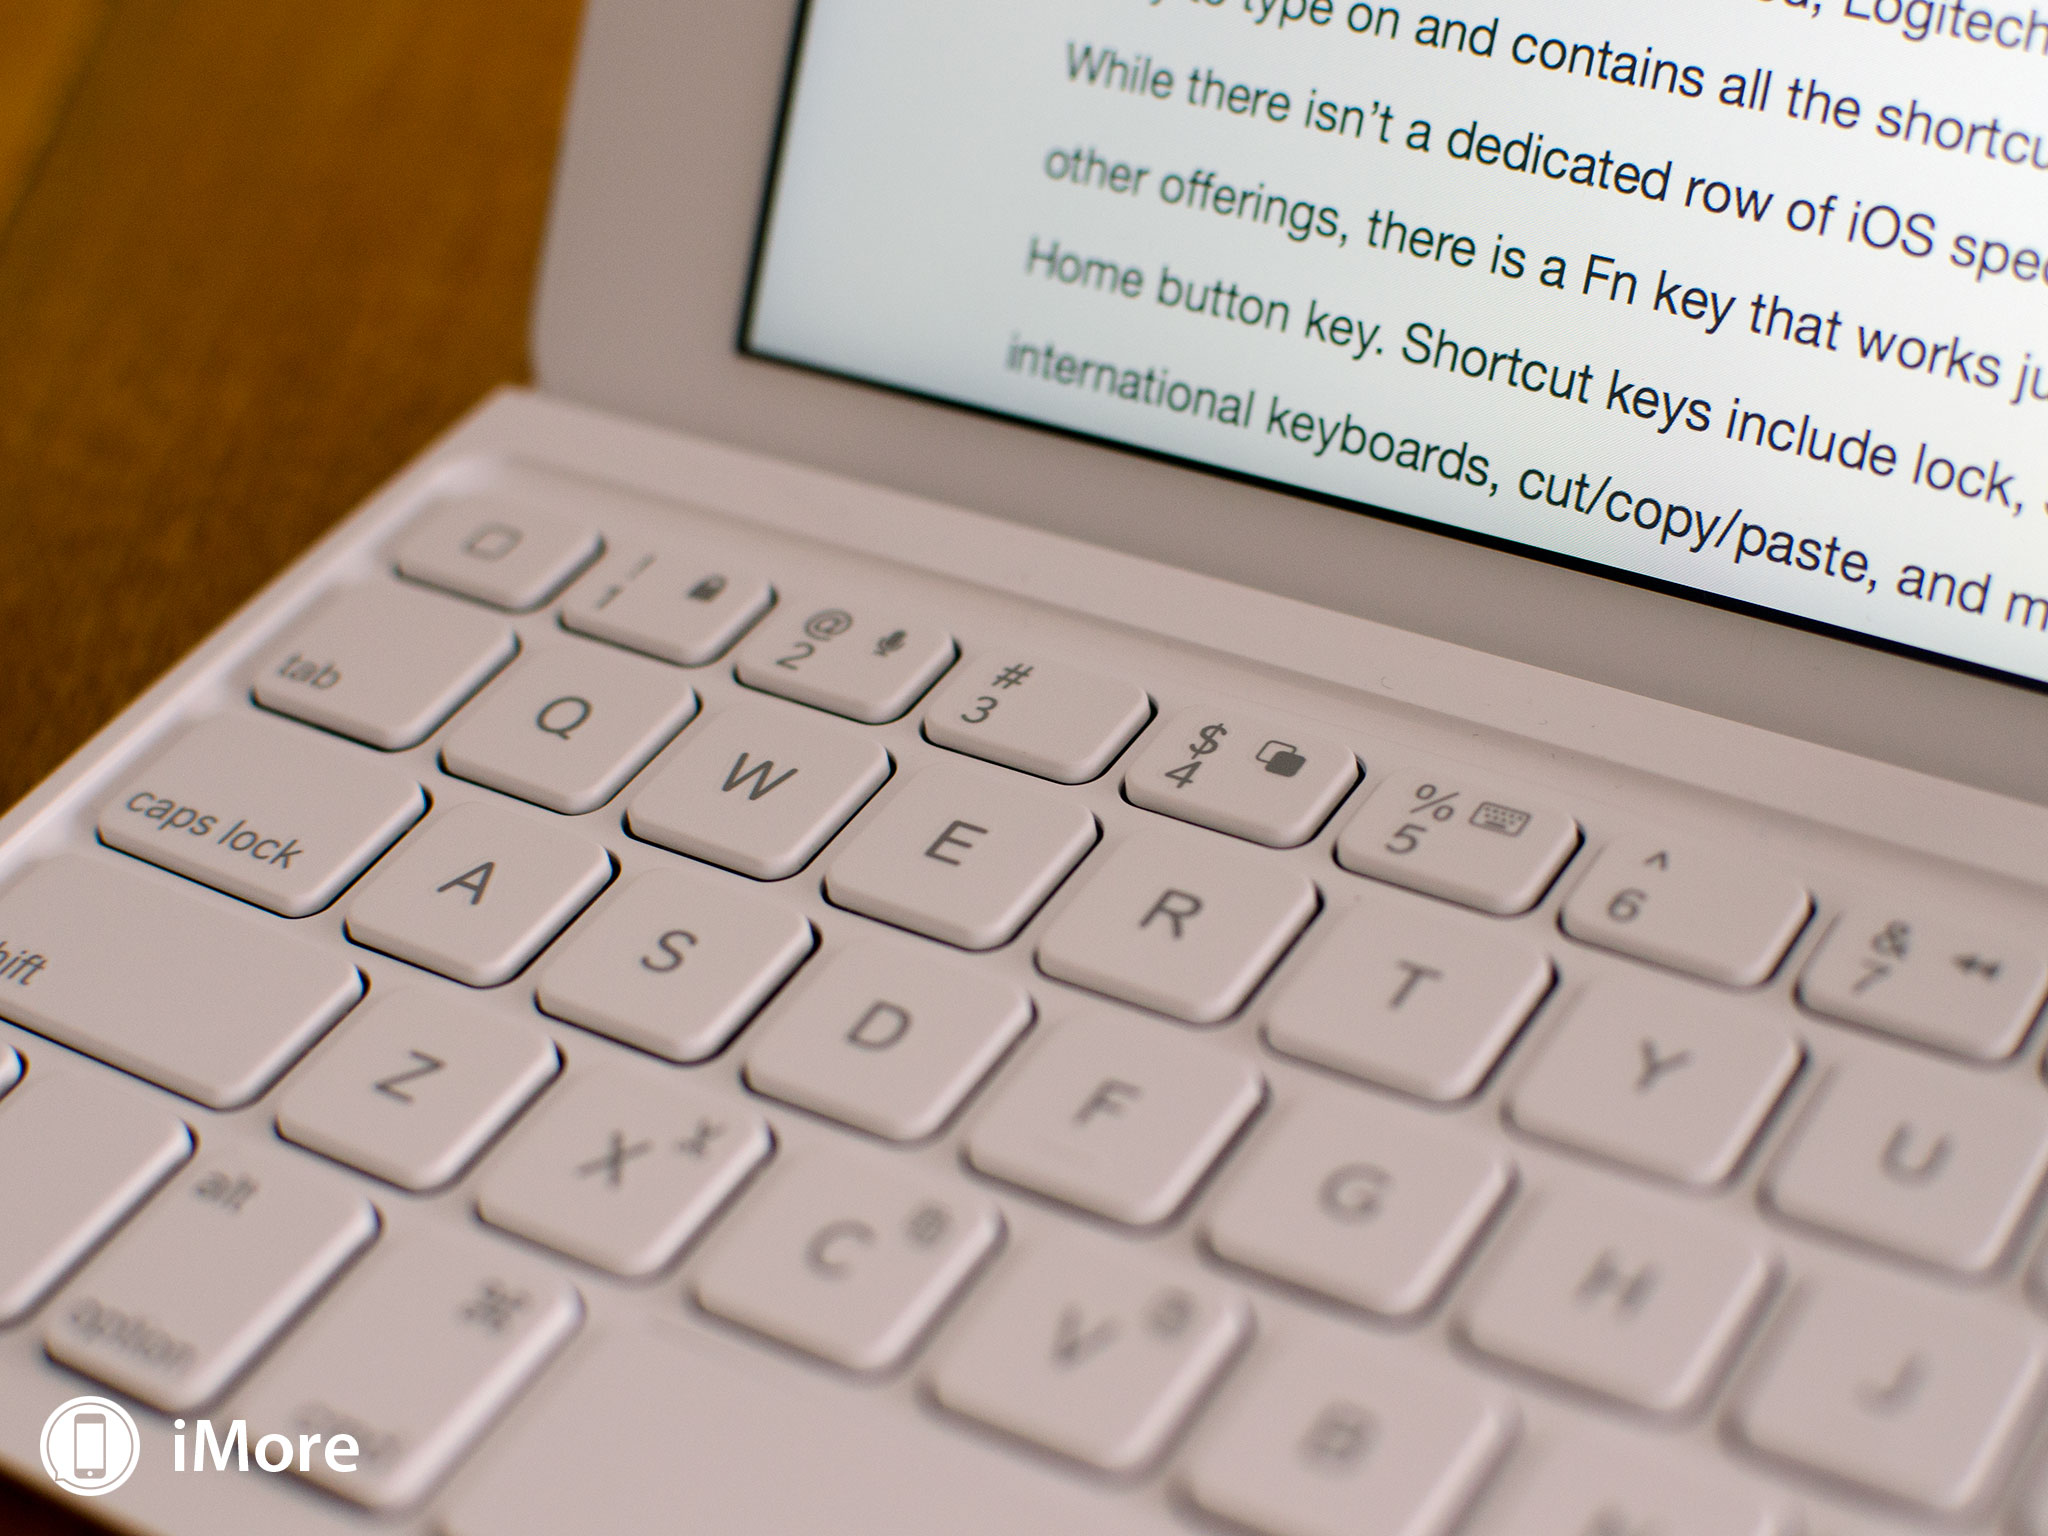 Logitech Ultrathin Keyboard Cover for iPad Air review